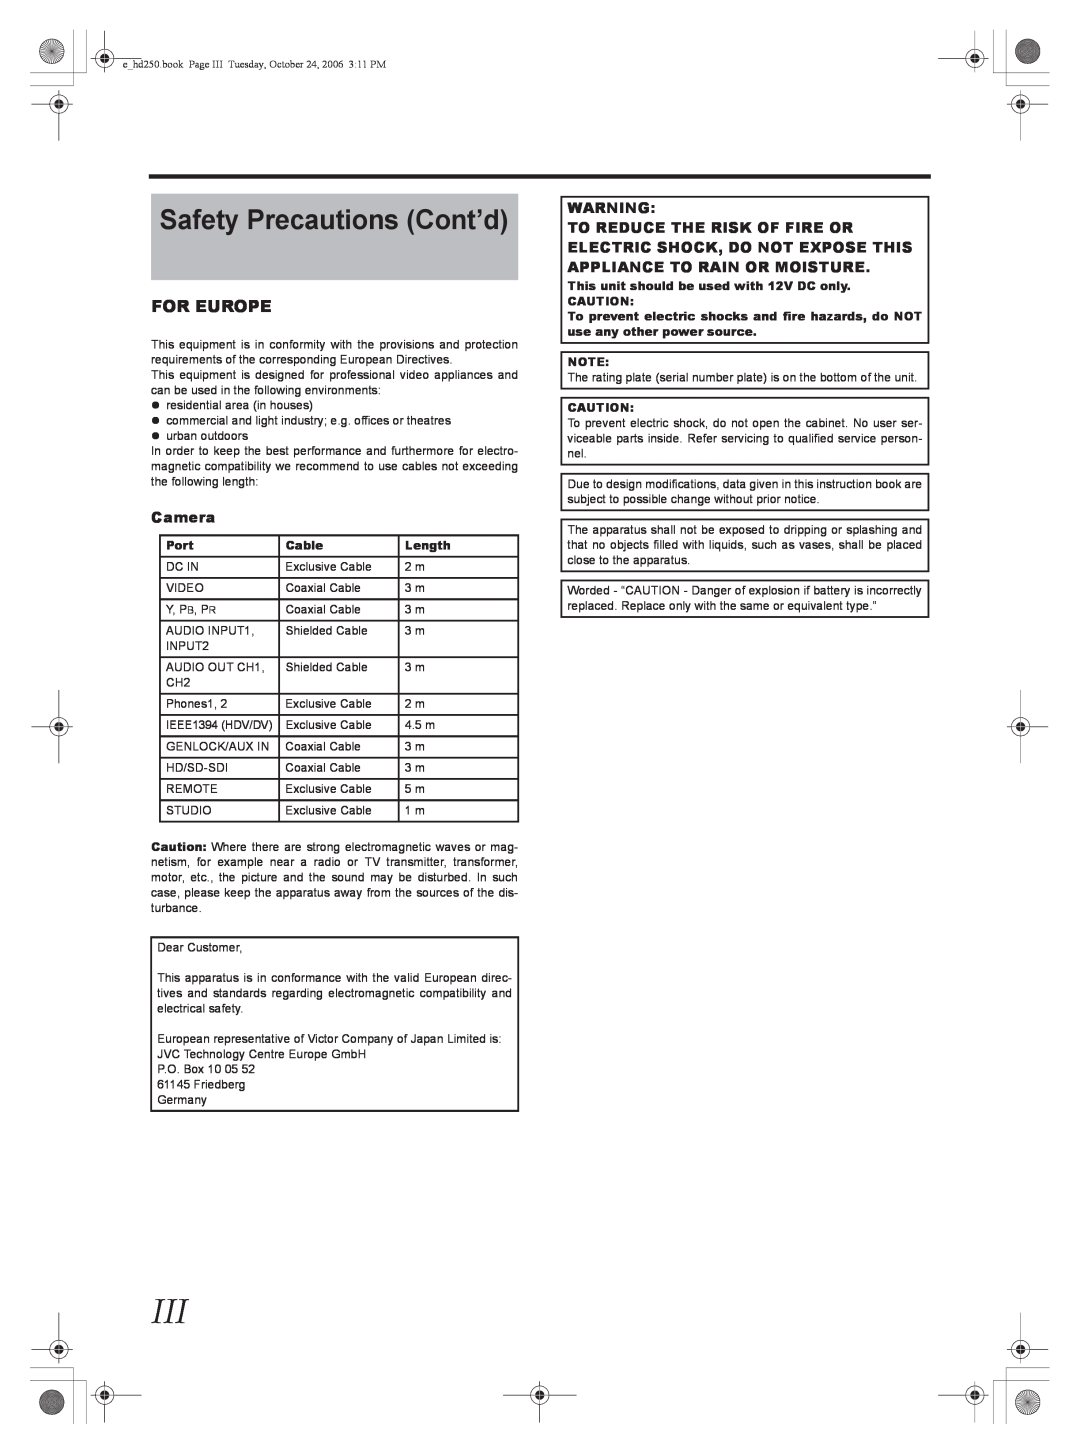 JVC GY-HD250, GY-HD251 manual Safety Precautions Cont’d, For Europe, Camera 